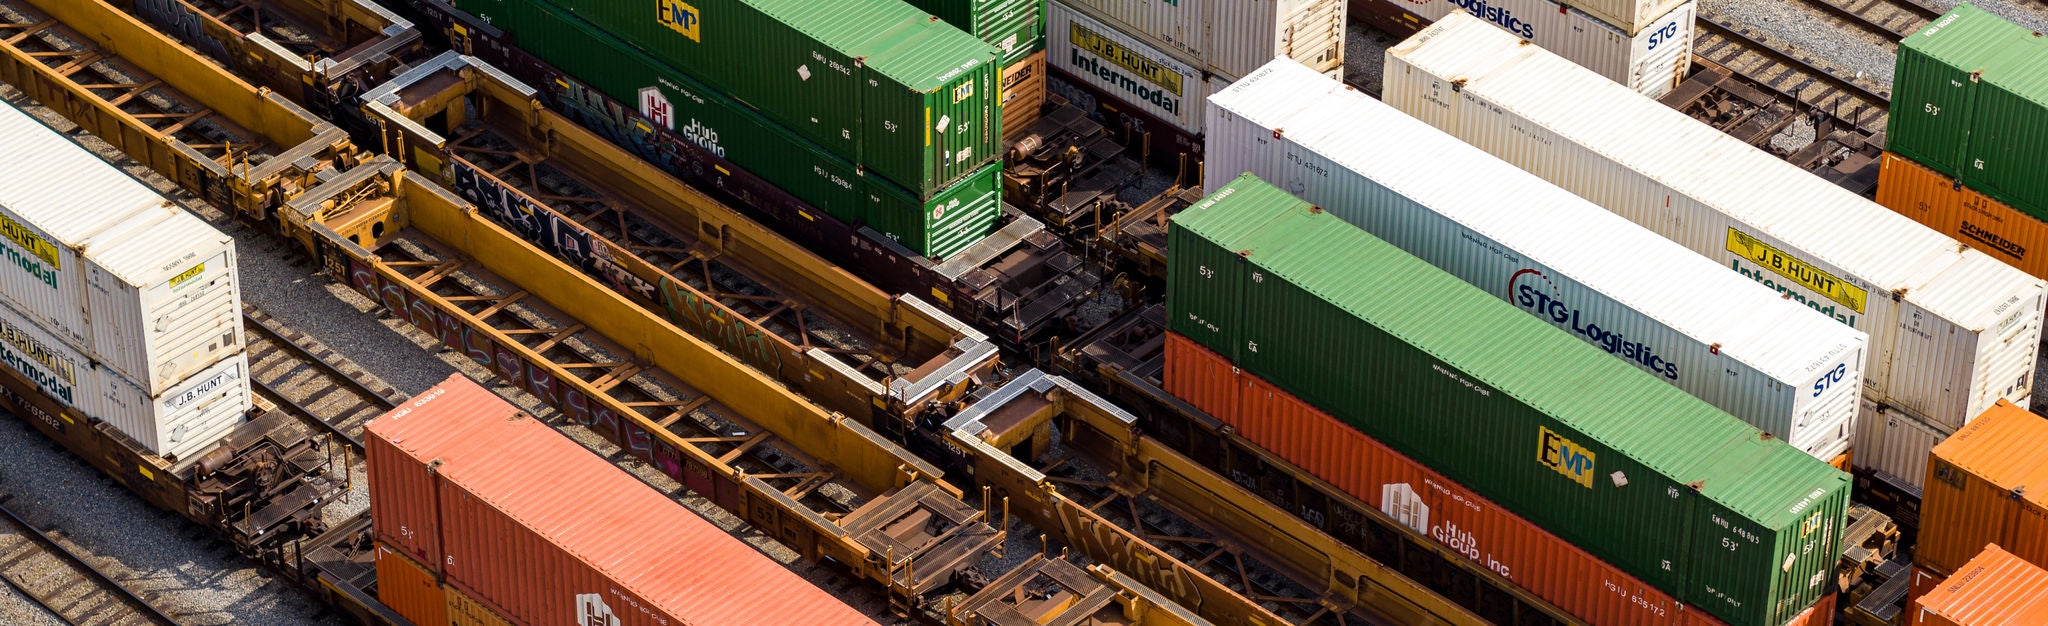 Multiple Norfolk Southern railway containers at an intermodal container terminal.